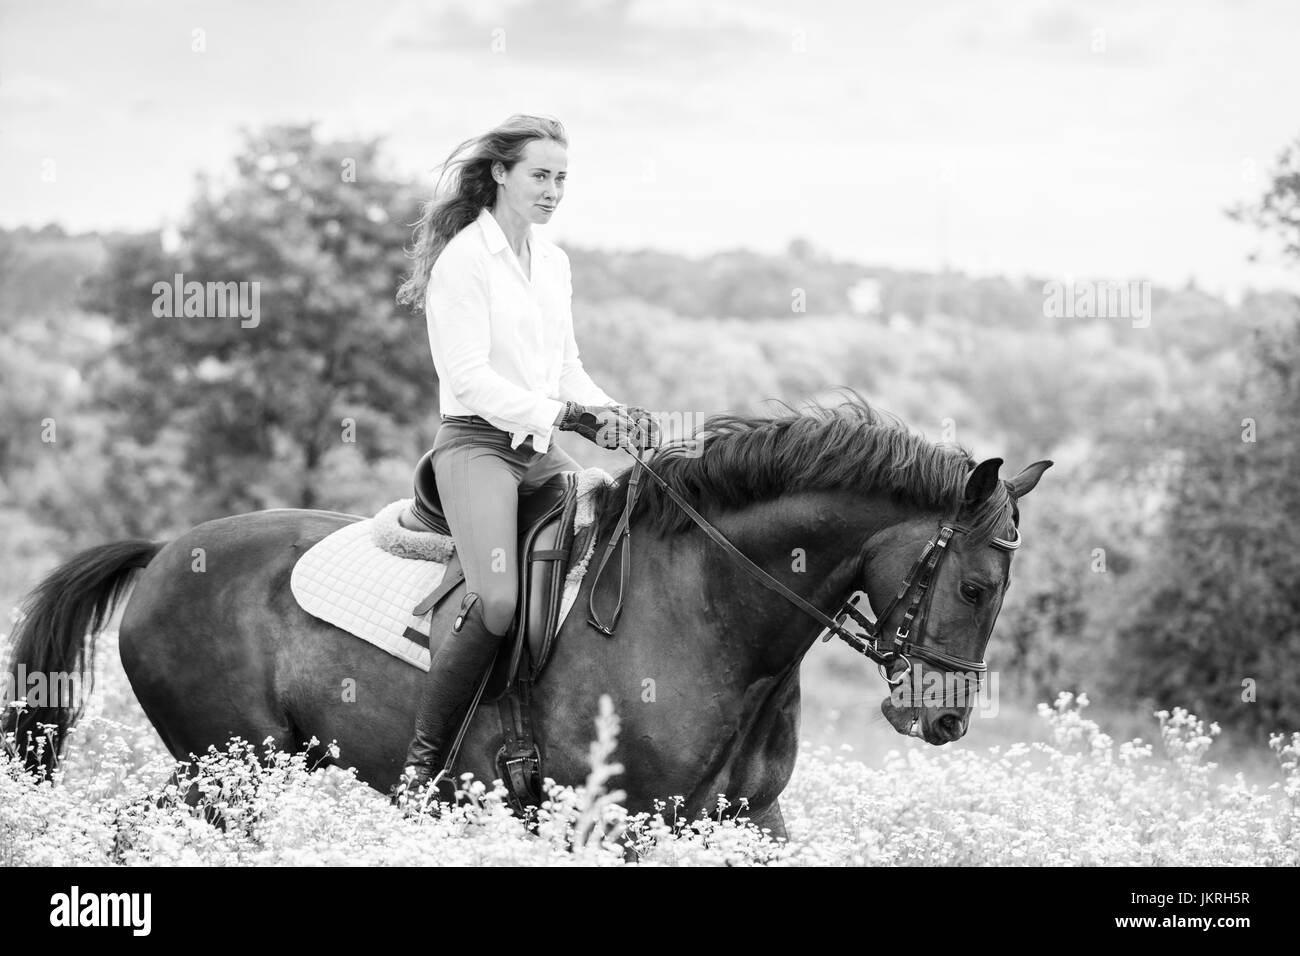 Young rider girl with long hair riding bay horse on camomile field Stock Photo